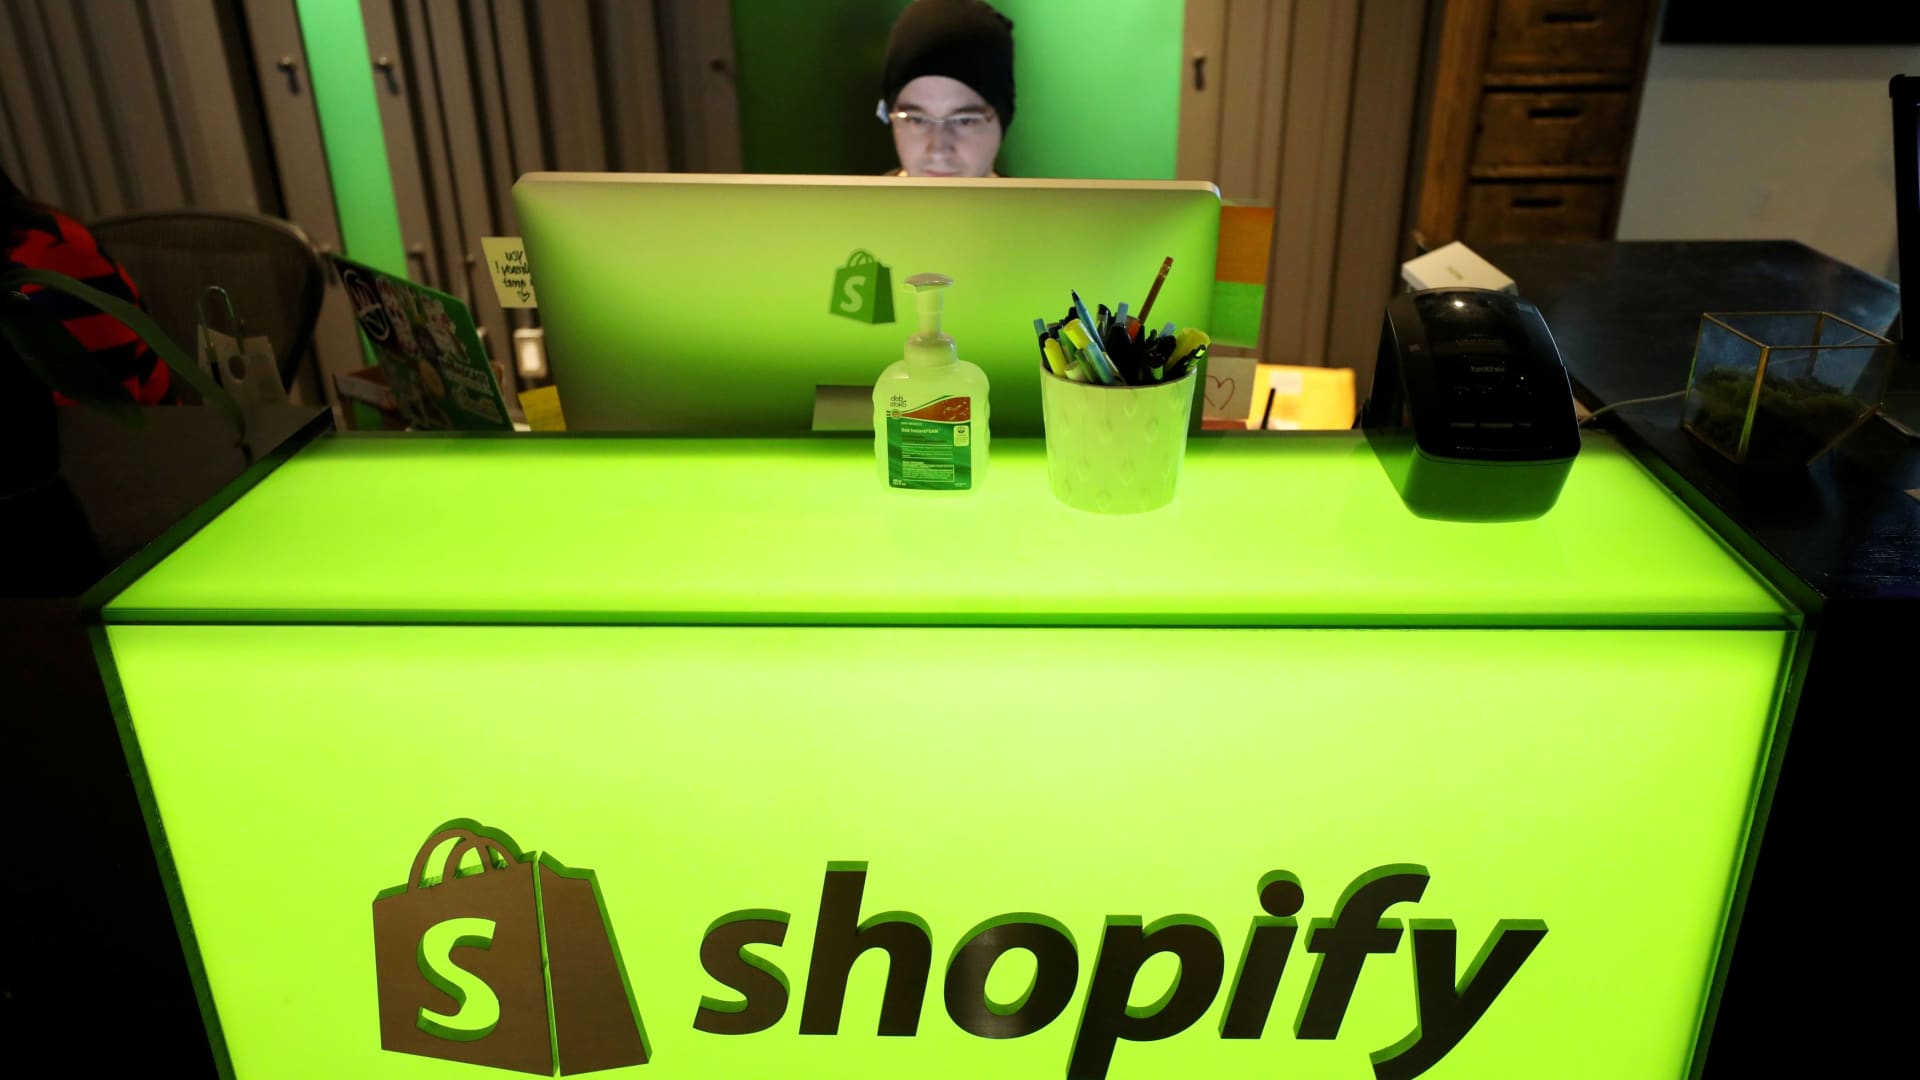 Shopify stock pops after company strikes ‘Buy with Prime’ deal with Amazon